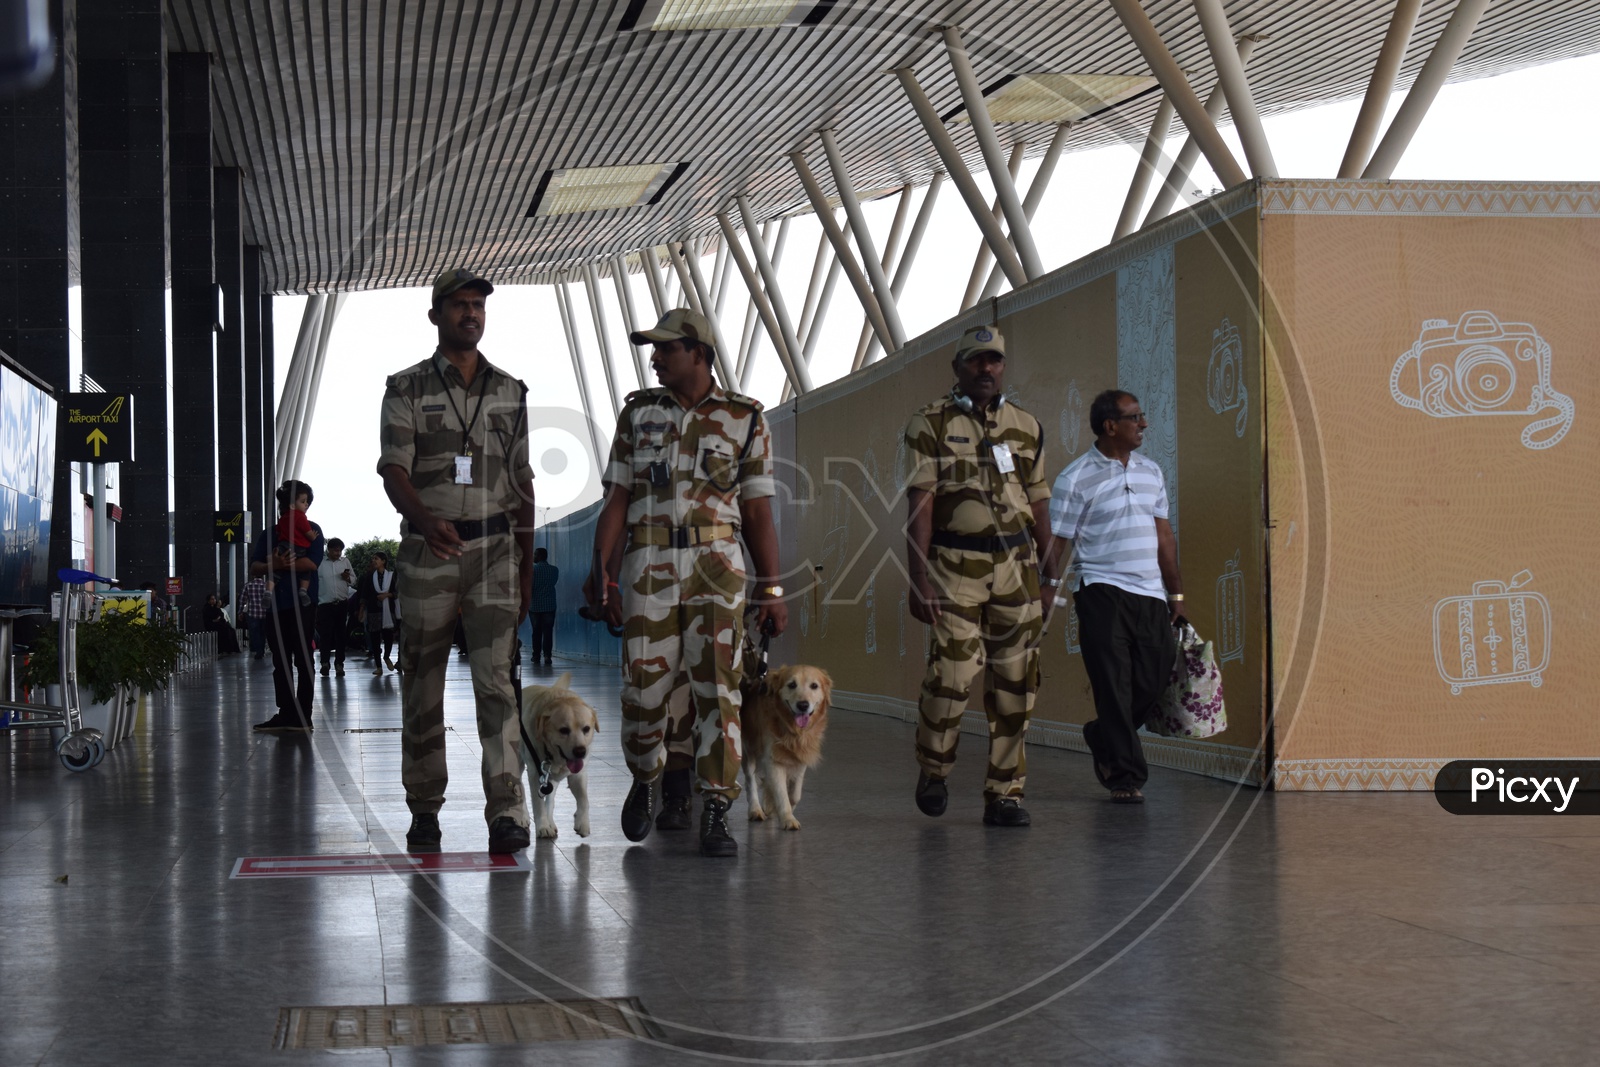 Security Guards in Airport